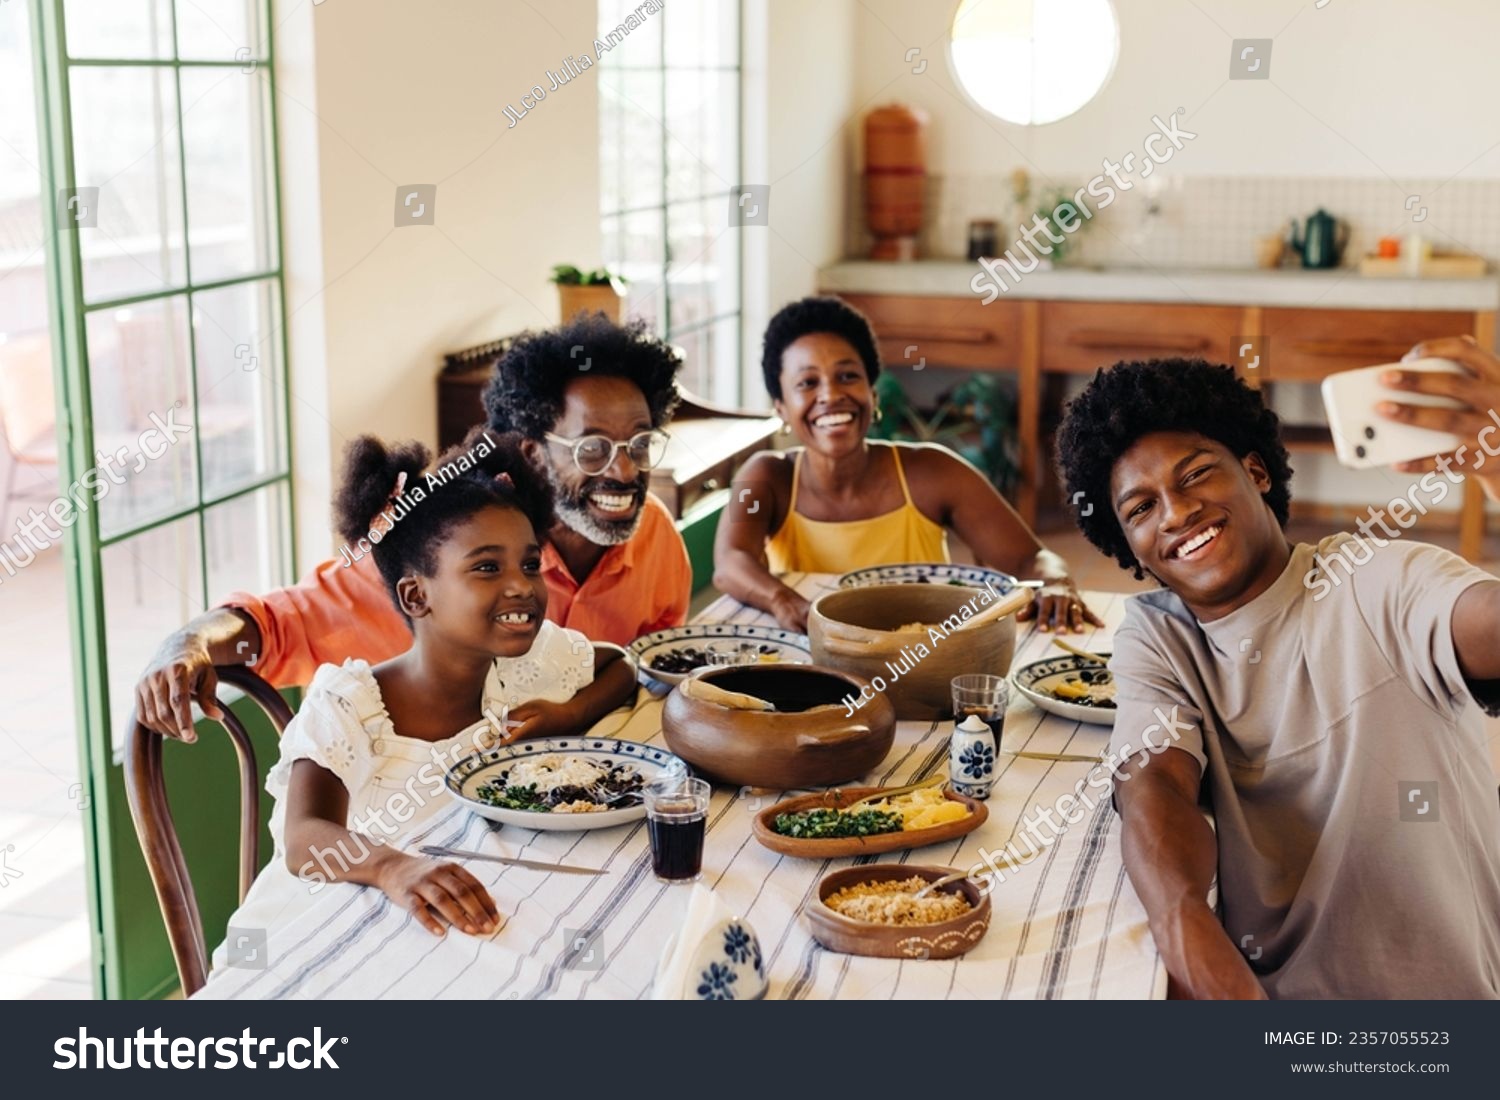 Happy Brazilian family sitting at the table for a traditional meal, with clay pots filled with delicious dishes. They smile and pose for a selfie, creating memories in their kitchen. #2357055523